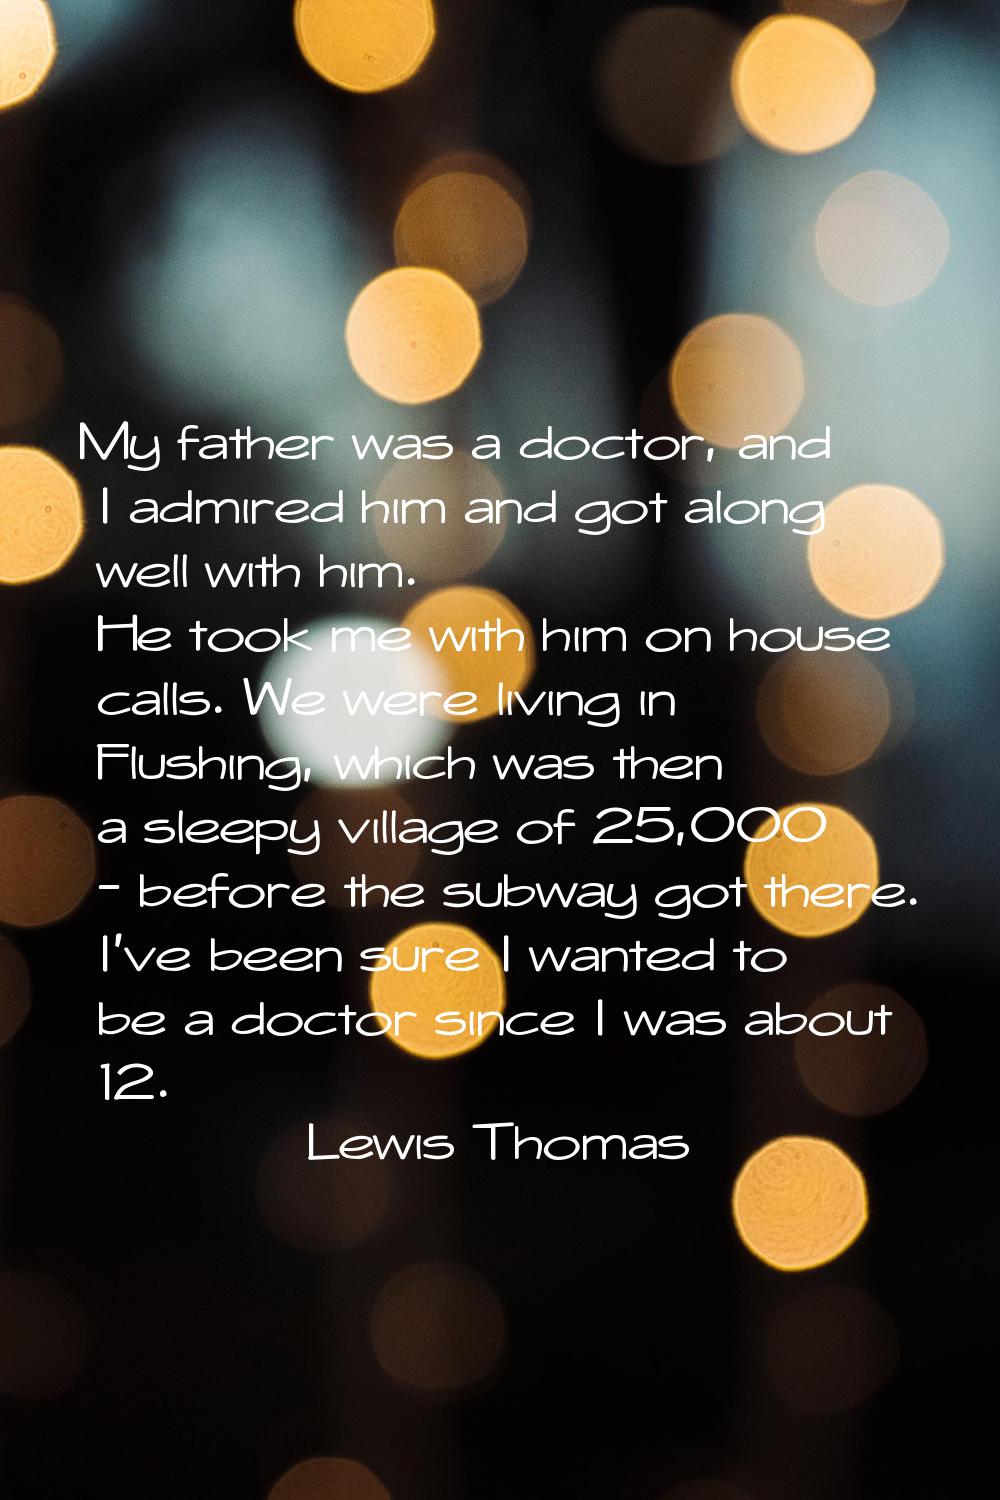 My father was a doctor, and I admired him and got along well with him. He took me with him on house